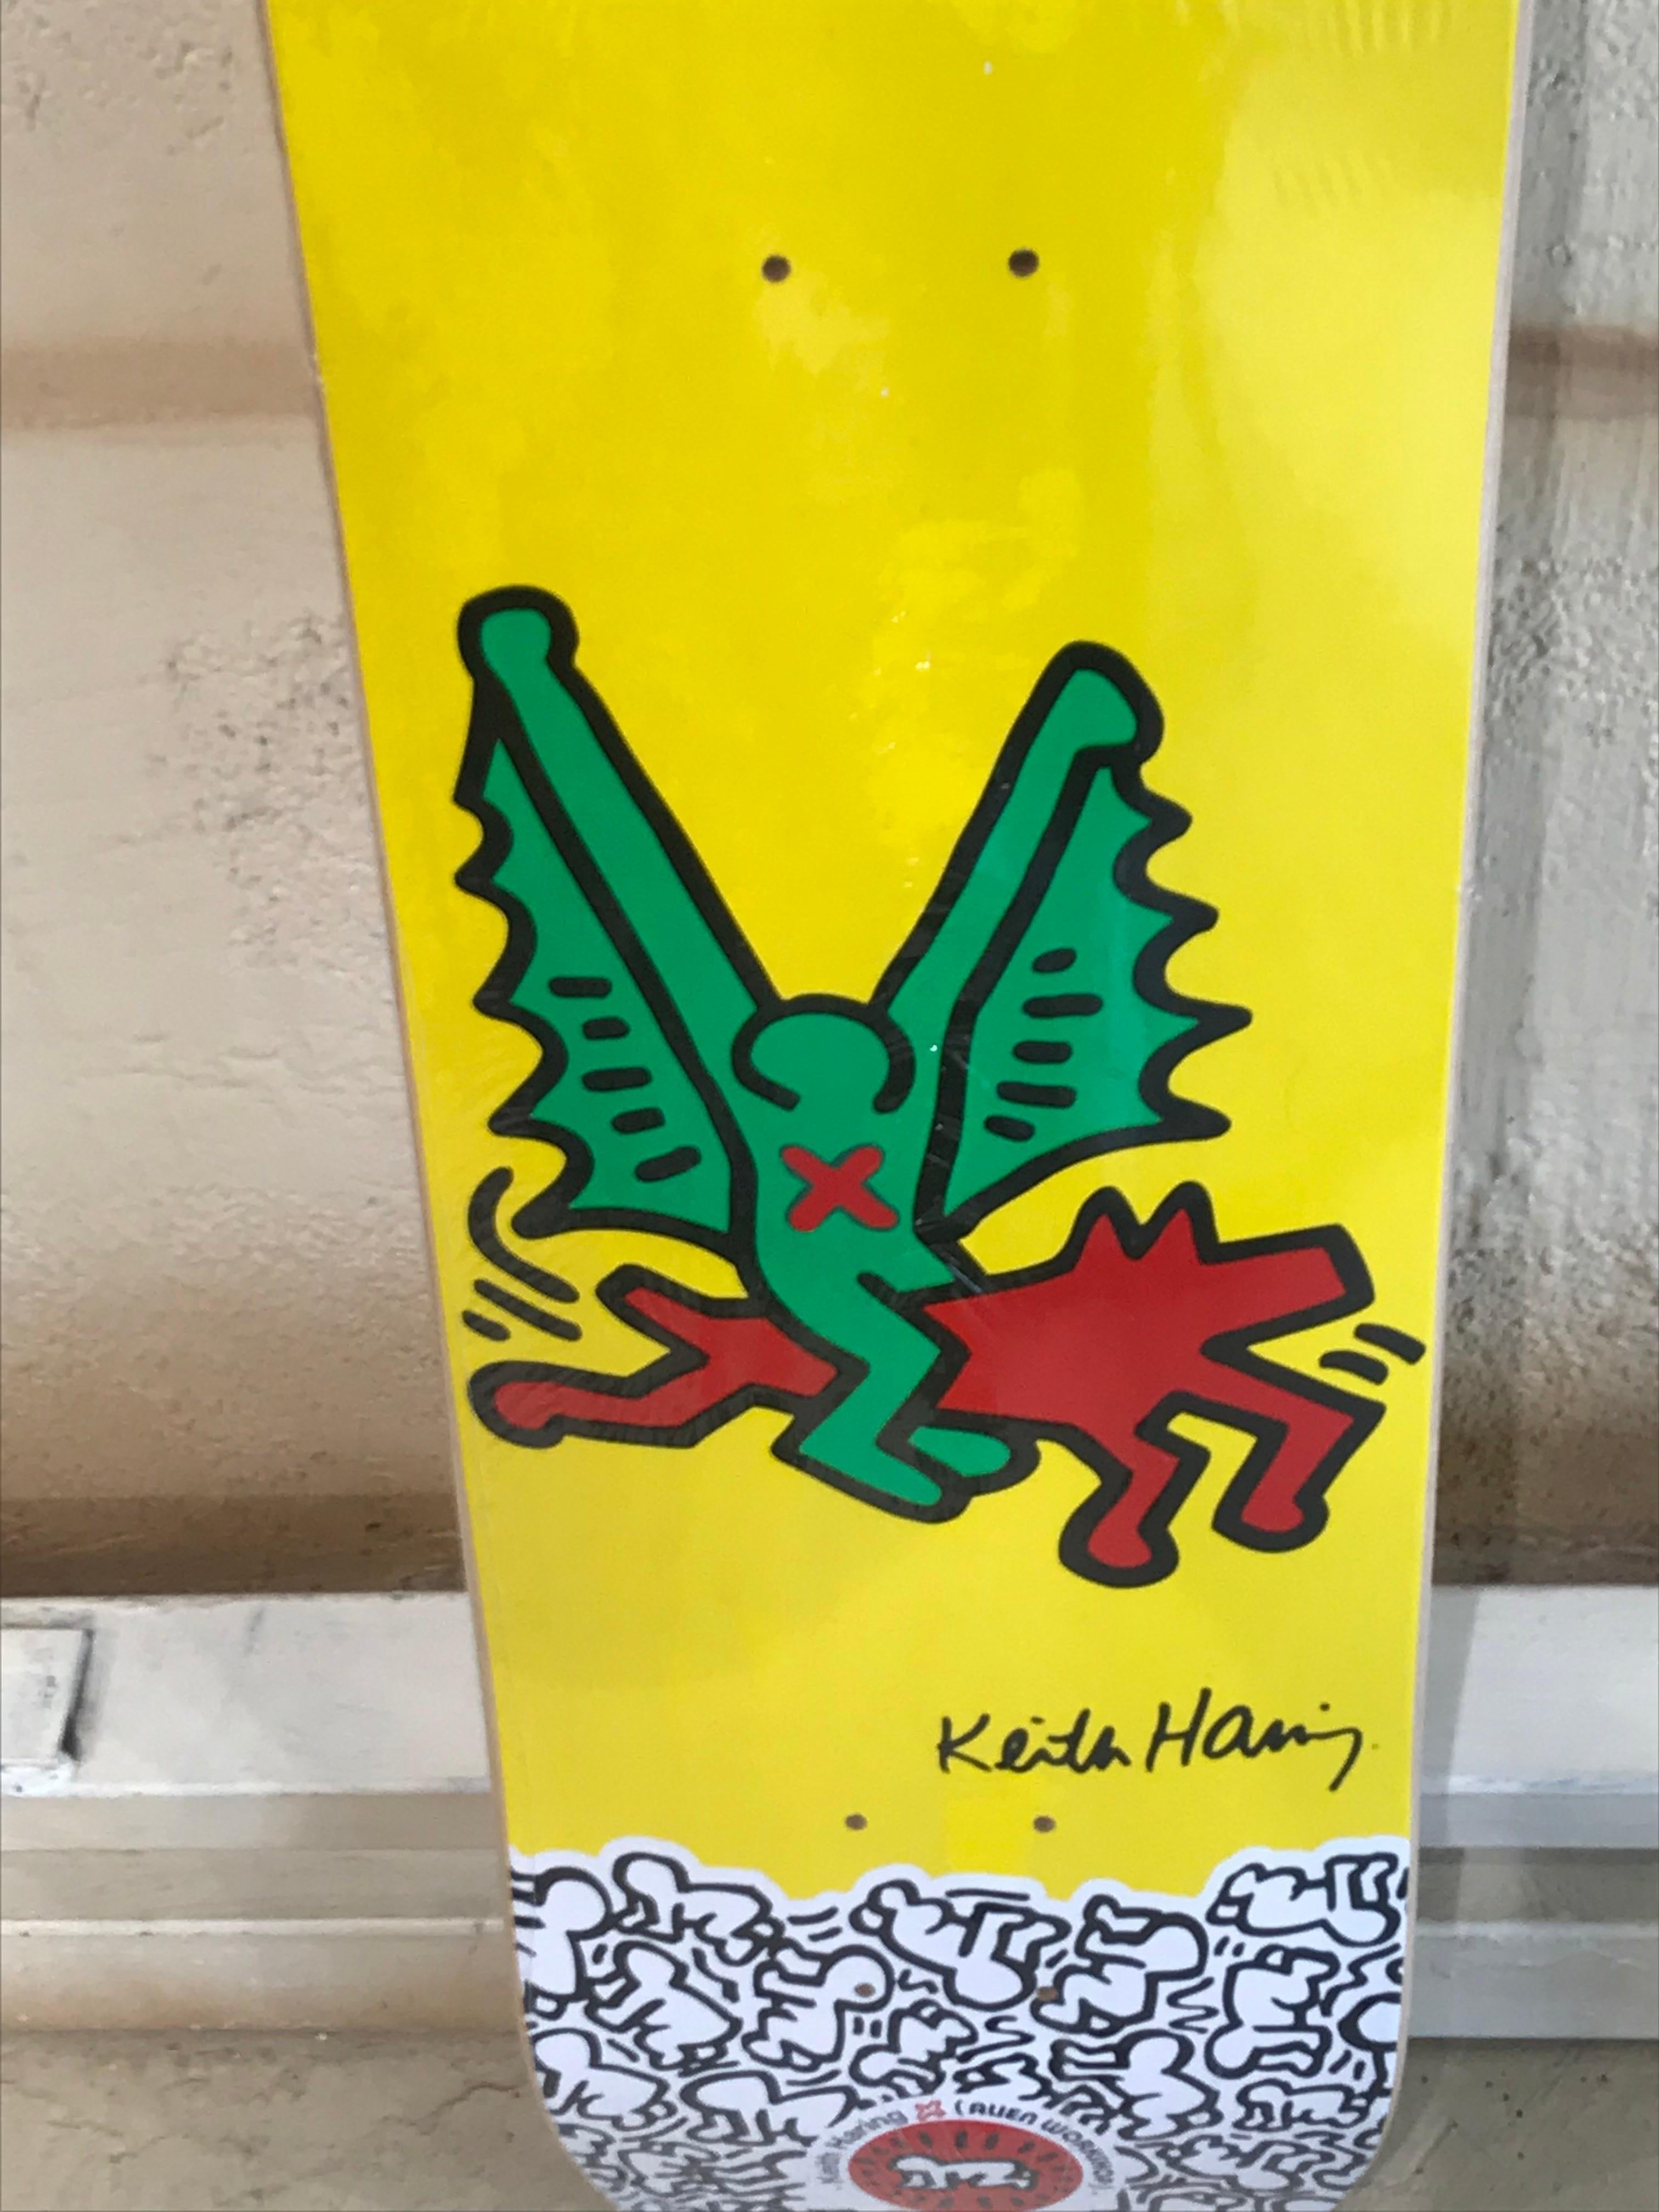 Skate board limited edition Keith Haring
Édited by alien workshop
circa 2008.
Deco recto et verso
New
Wrapped in plastic with stickers et étiquet
Plate signed
Measures: 80 x 20.5 x 6 cms.